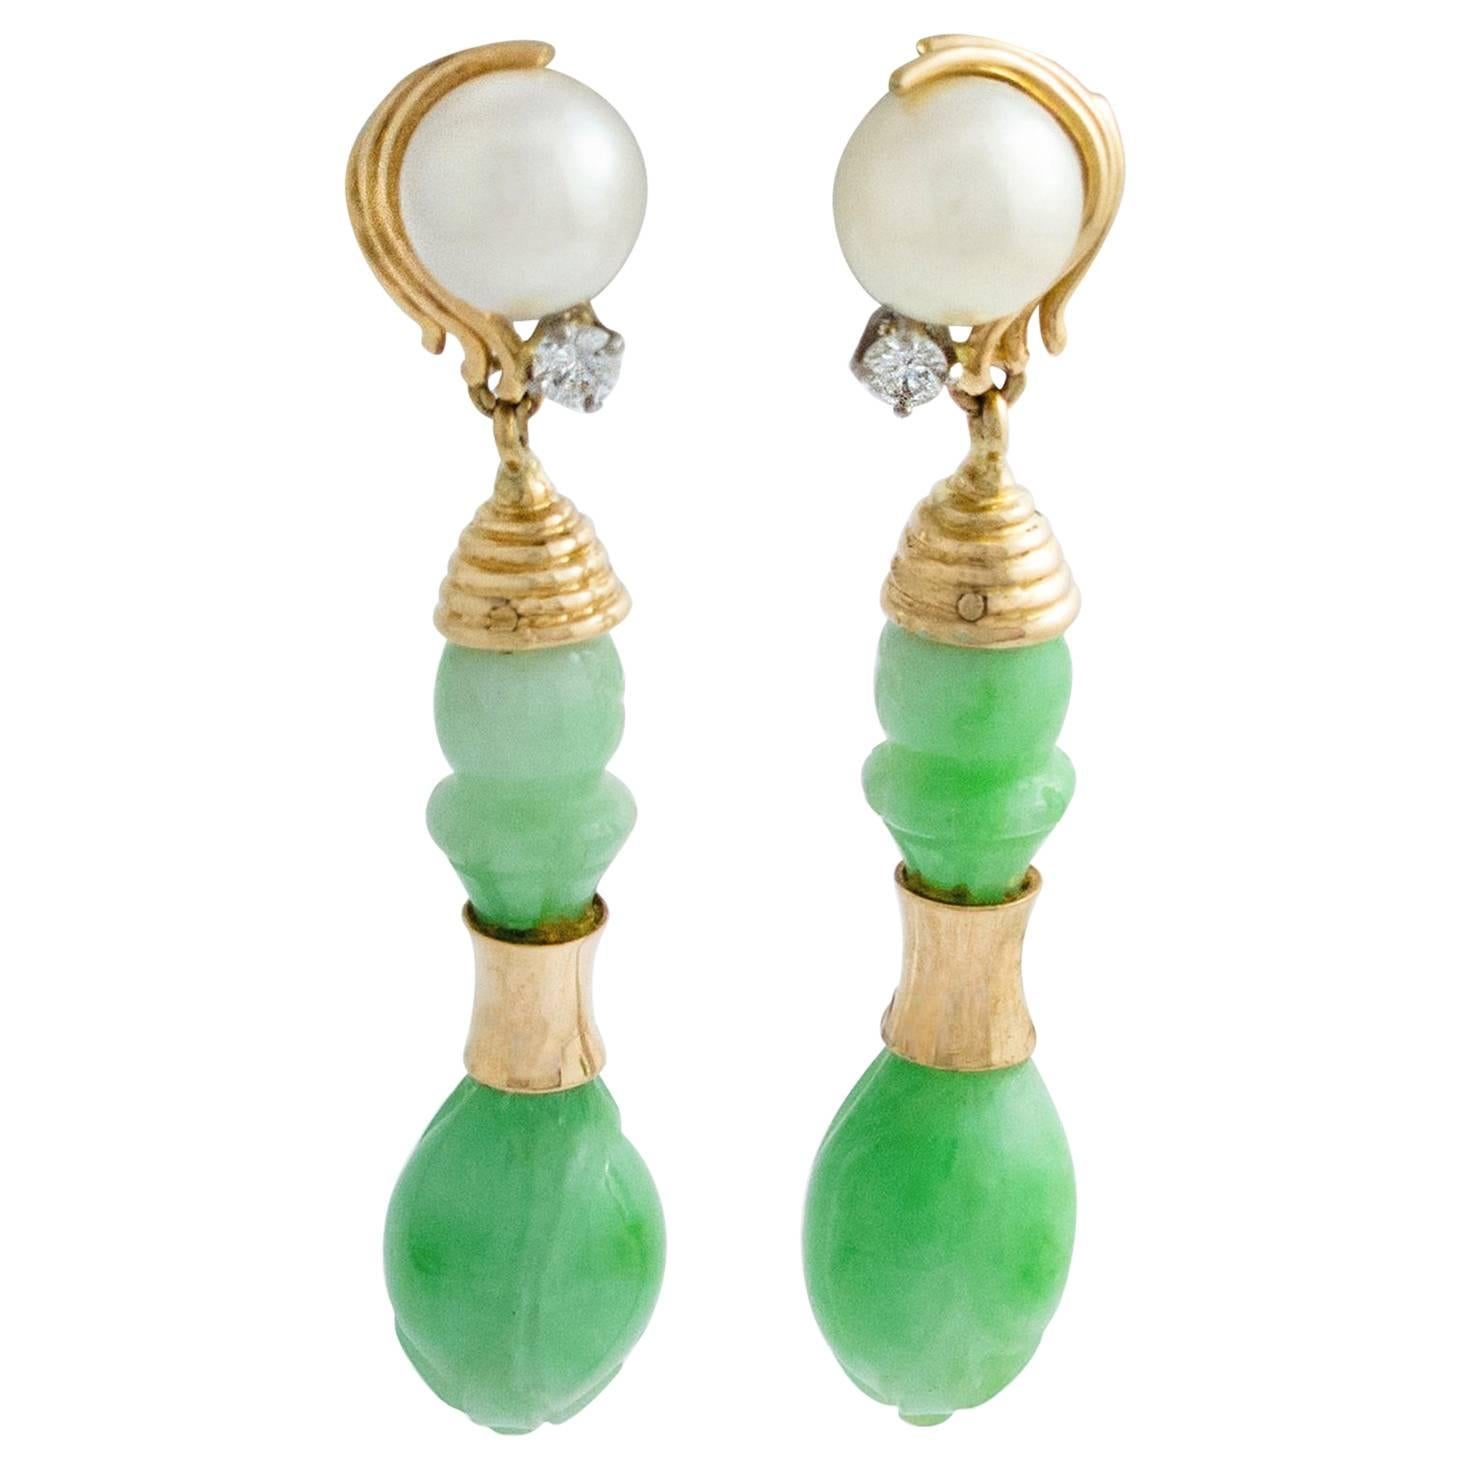 Carved Jade and Pearl Drop Earrings with diamonds in yellow gold